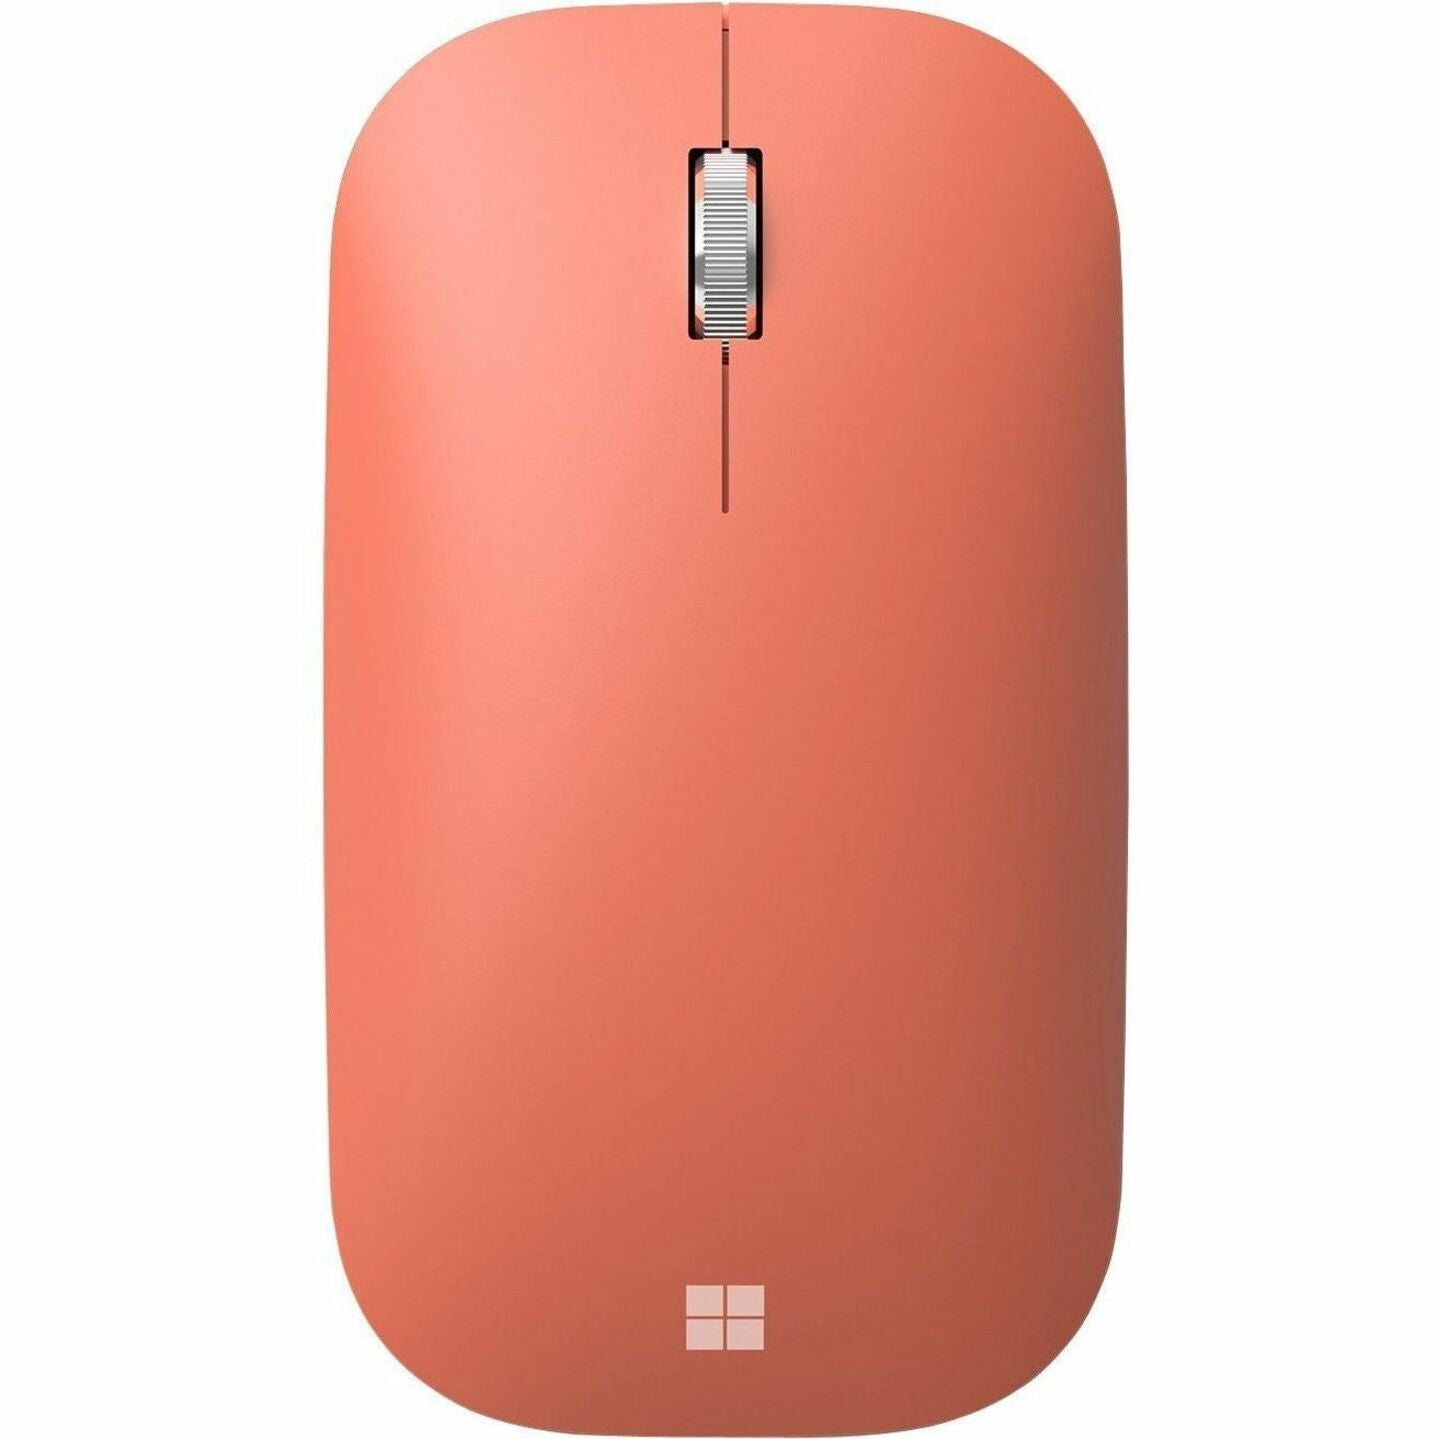 Microsoft KTF-00040 Modern Mobile Mouse, Bluetooth Wireless, BlueTrack, 2.4 GHz, Peach Color